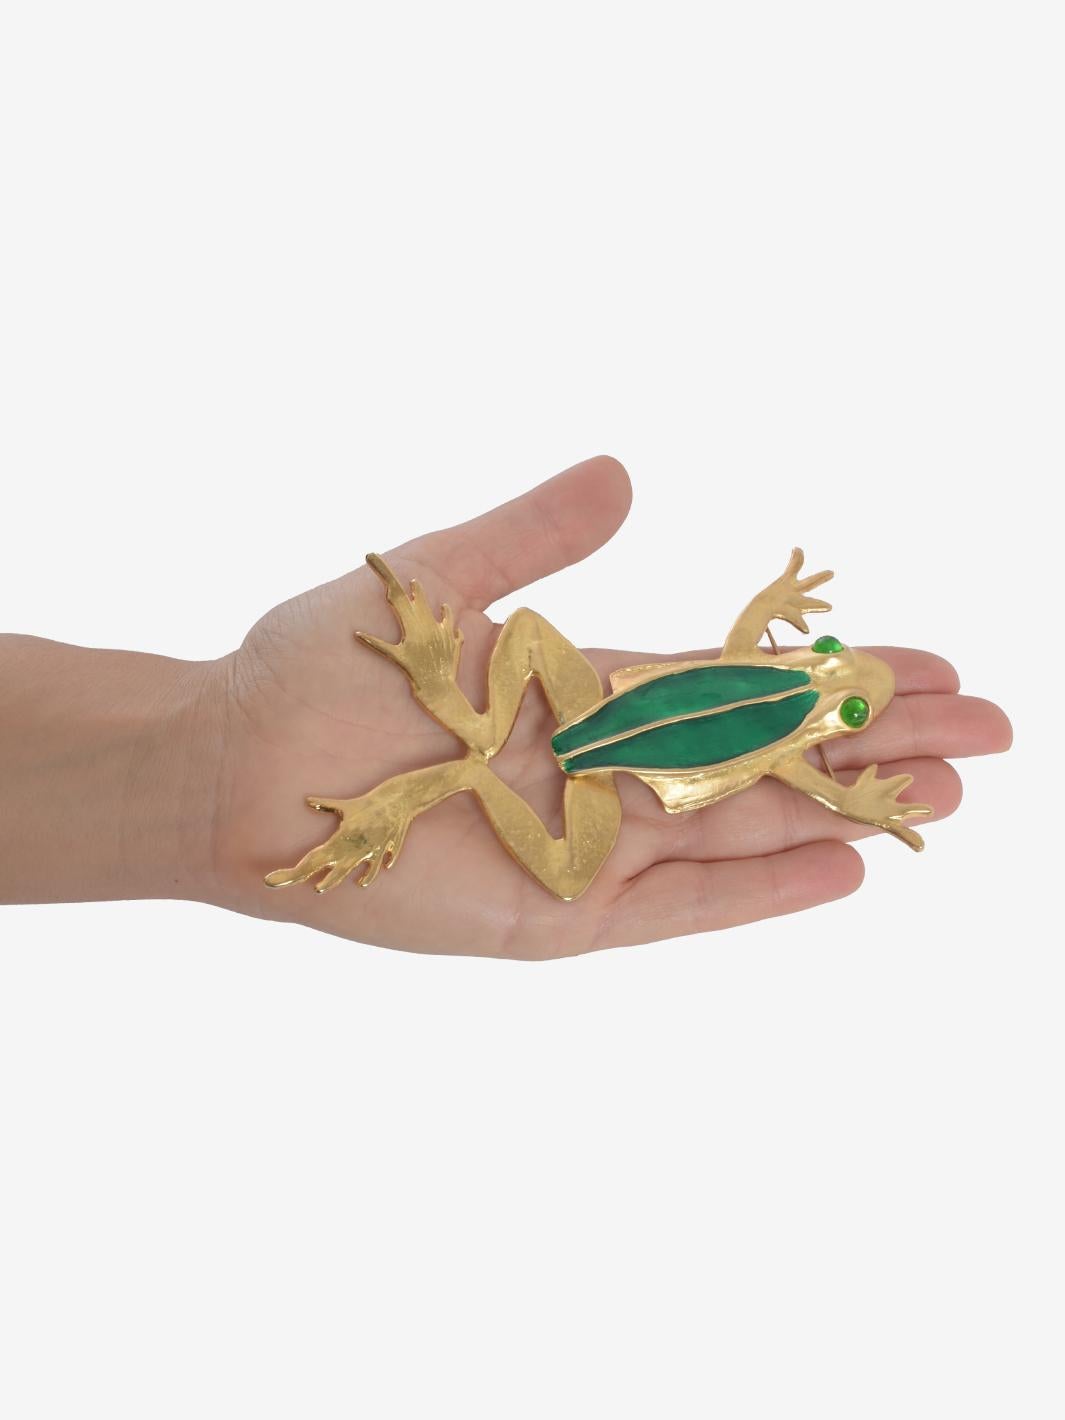 Kenneth Jay Lane Golden Frog Brooch In Excellent Condition For Sale In Milano, IT